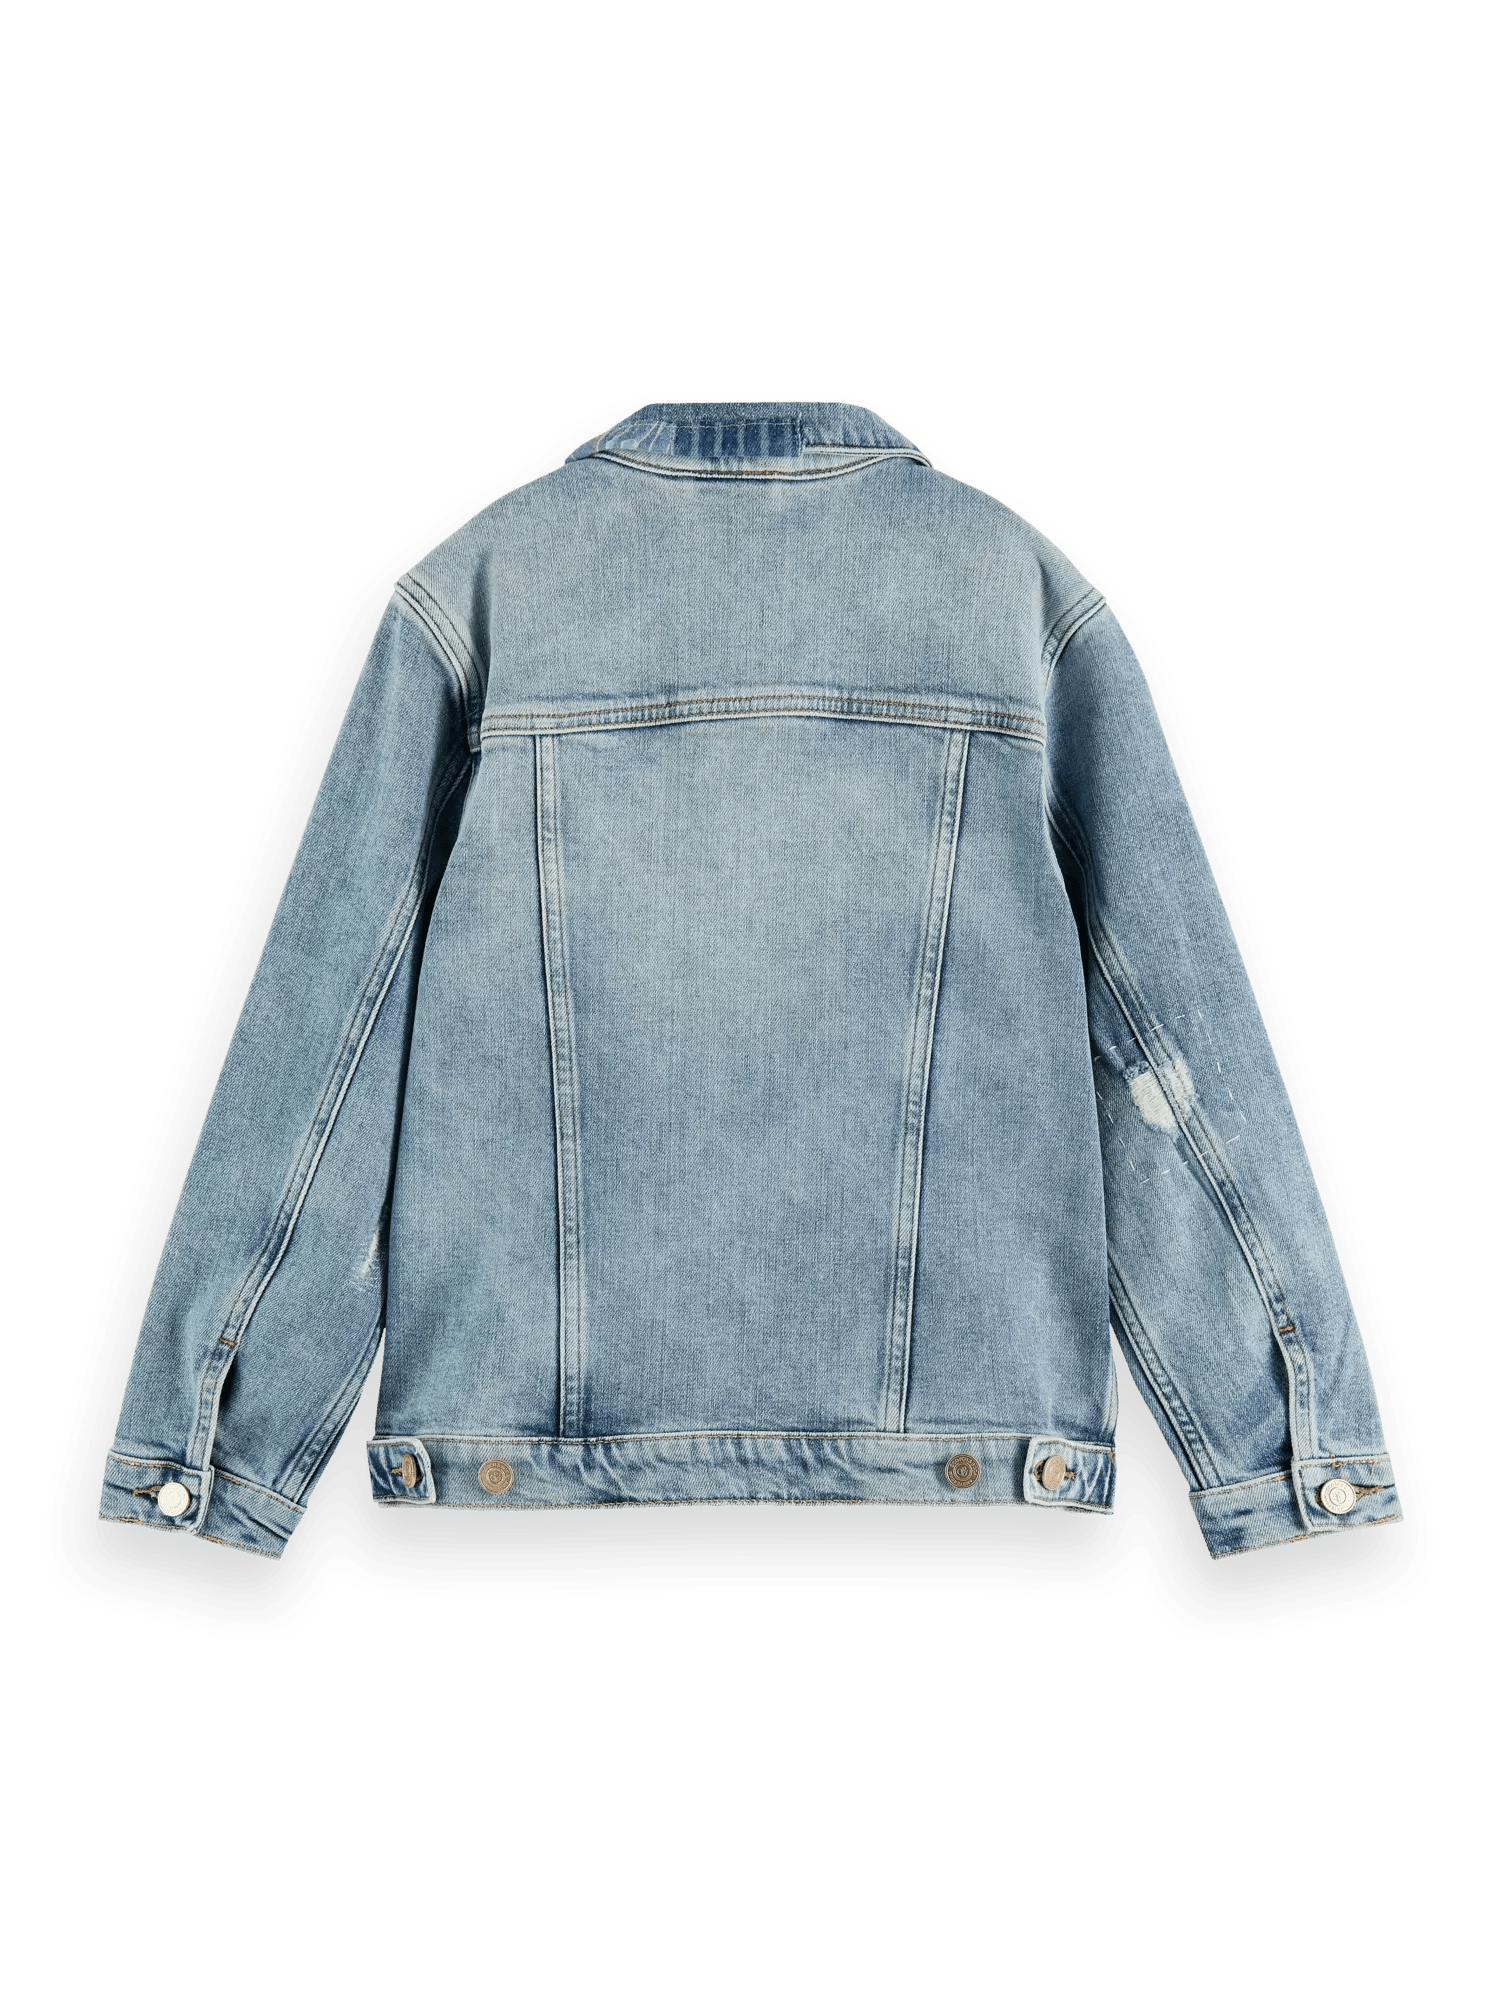 Scotch & Soda Denim trucker jacket with customised details — Clear Path BCK